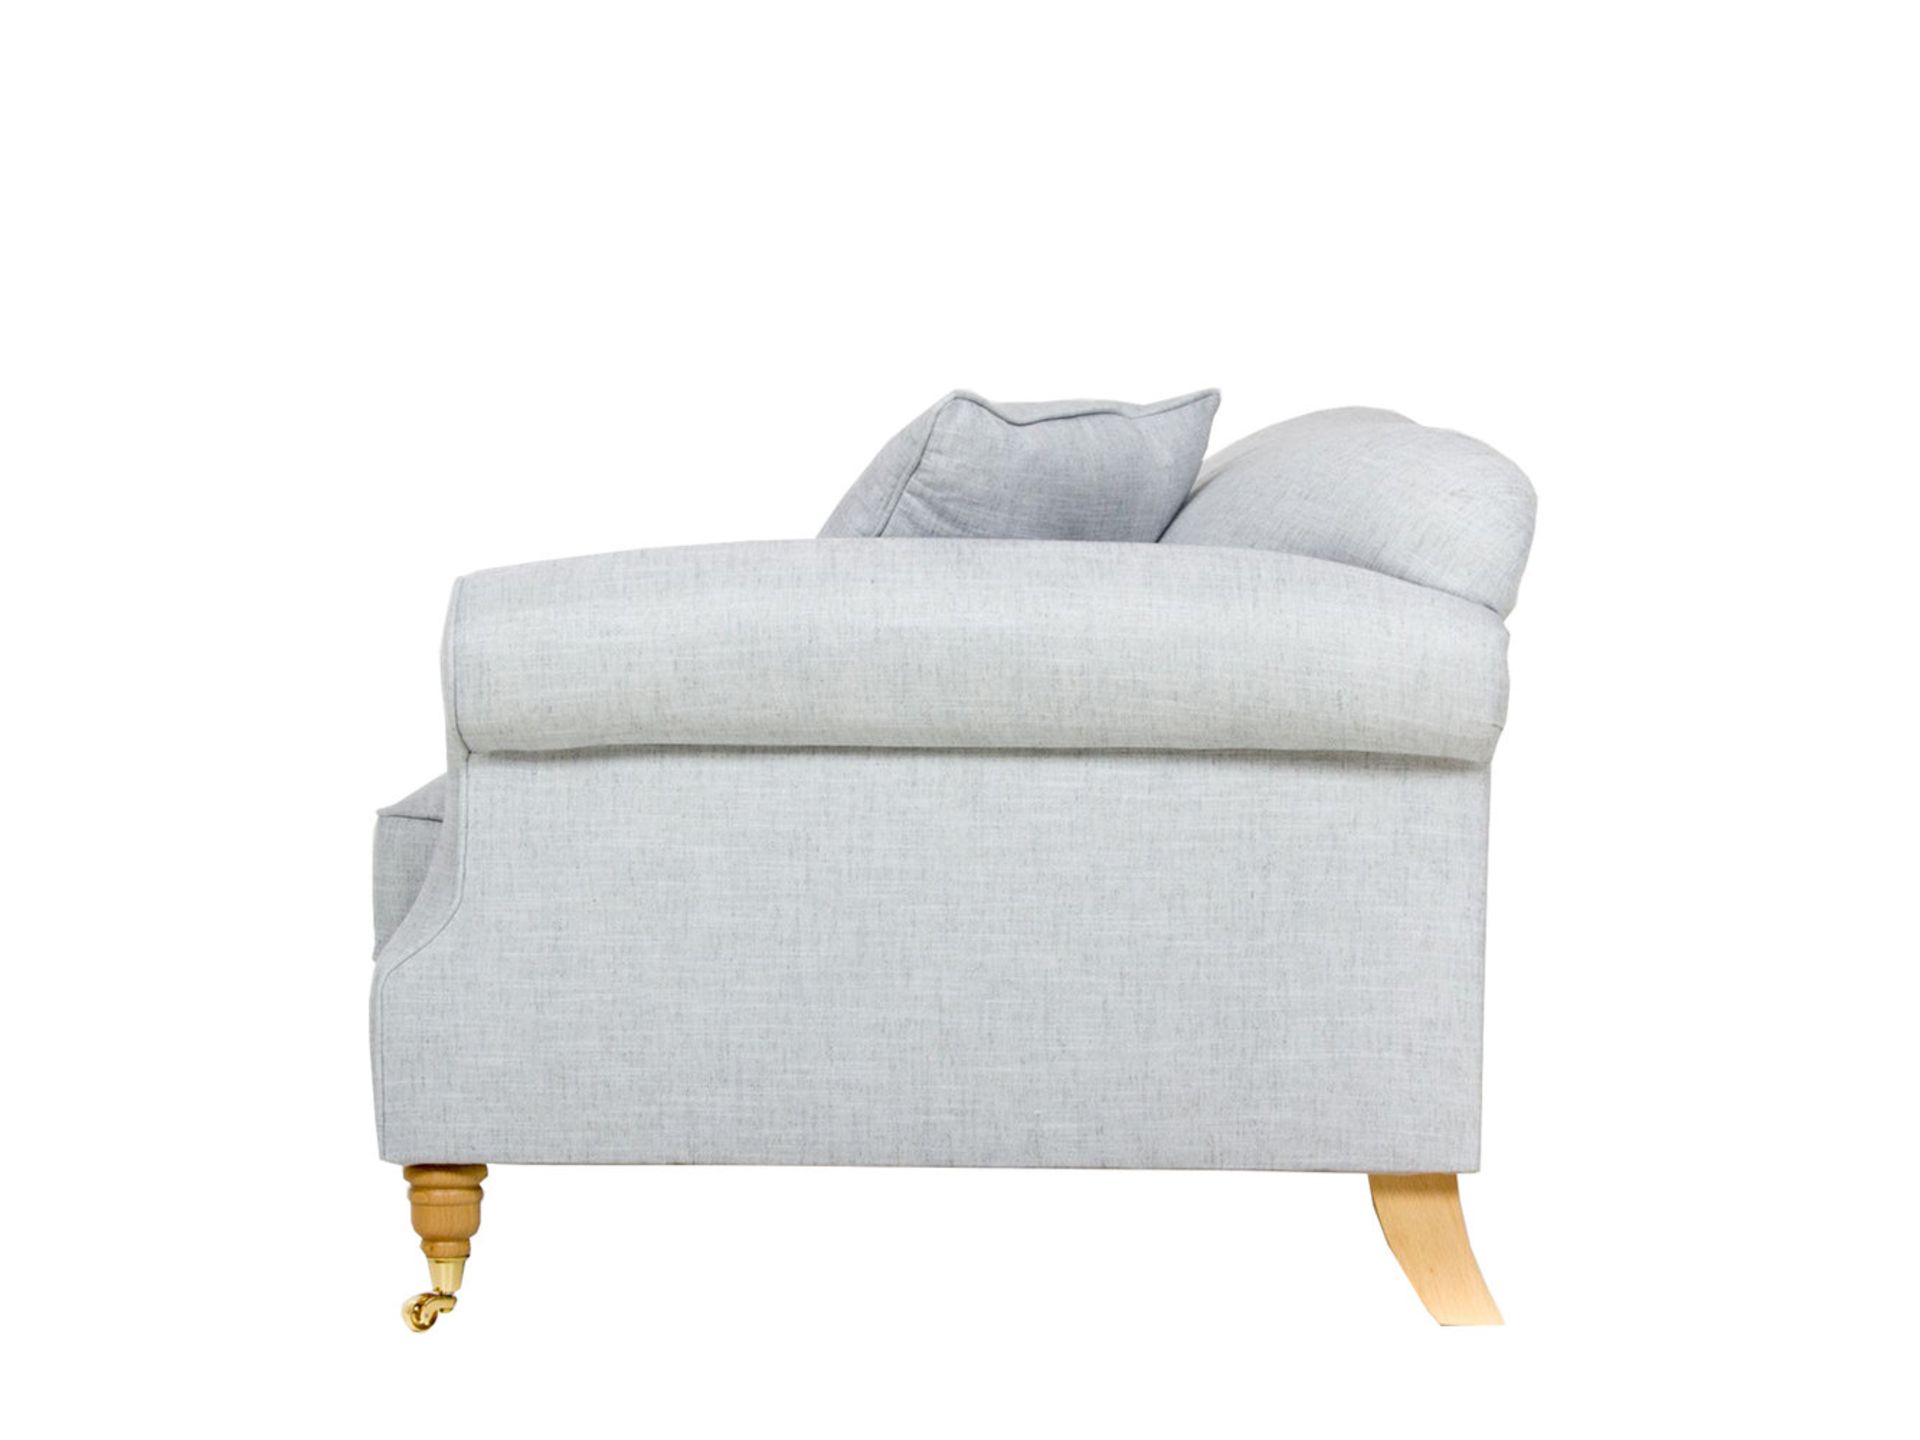 1 x Guilgud Sofa by Brewers Home - Ice White Upholstery - RRP £1,389! - Image 2 of 6